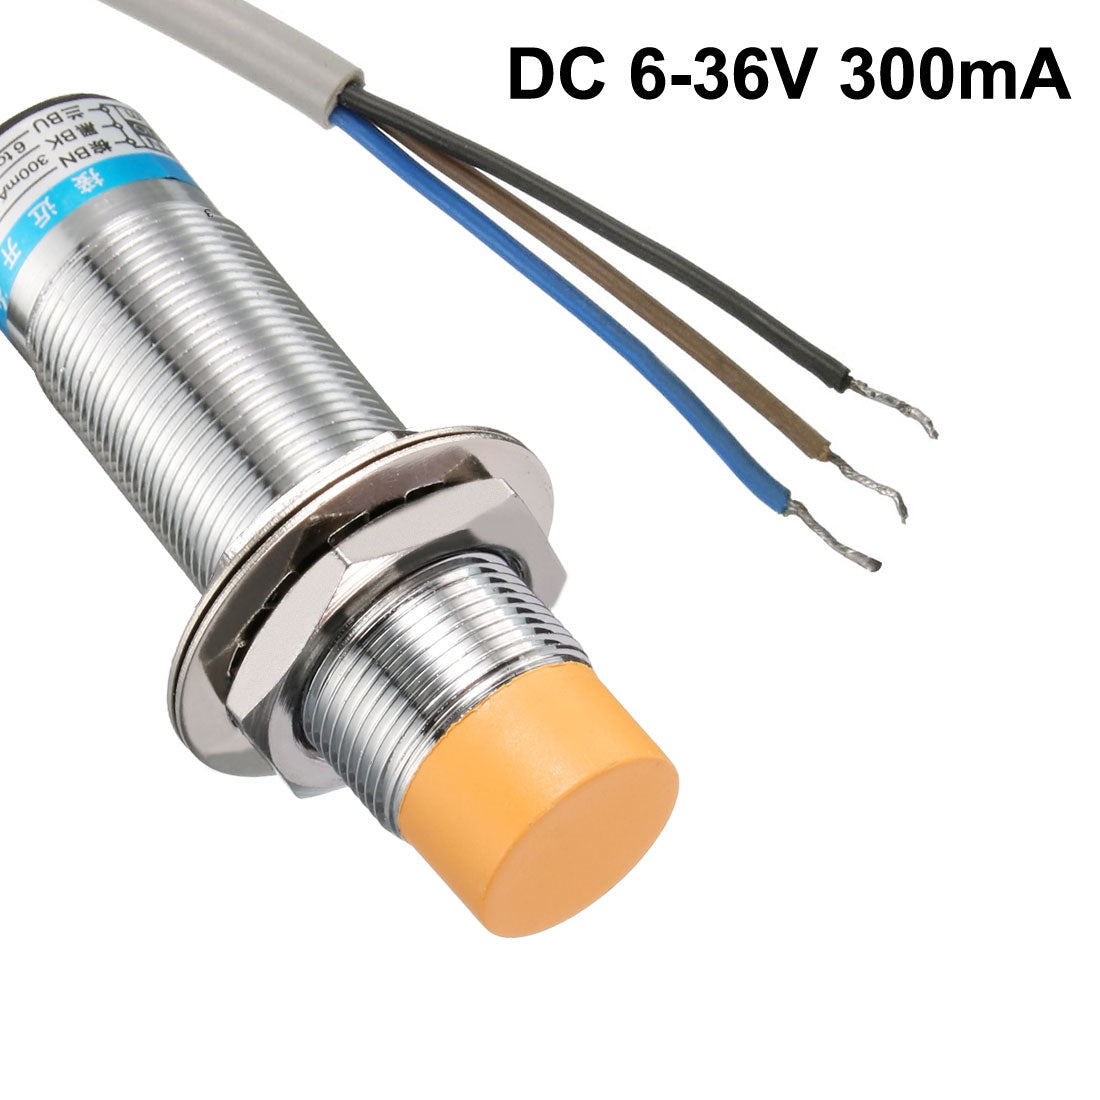 uxcell Uxcell 8mm Inductive Proximity Sensor Switch Detector NO DC 6-36V 300mA 3-wire LJ18A3-8-Z/BX